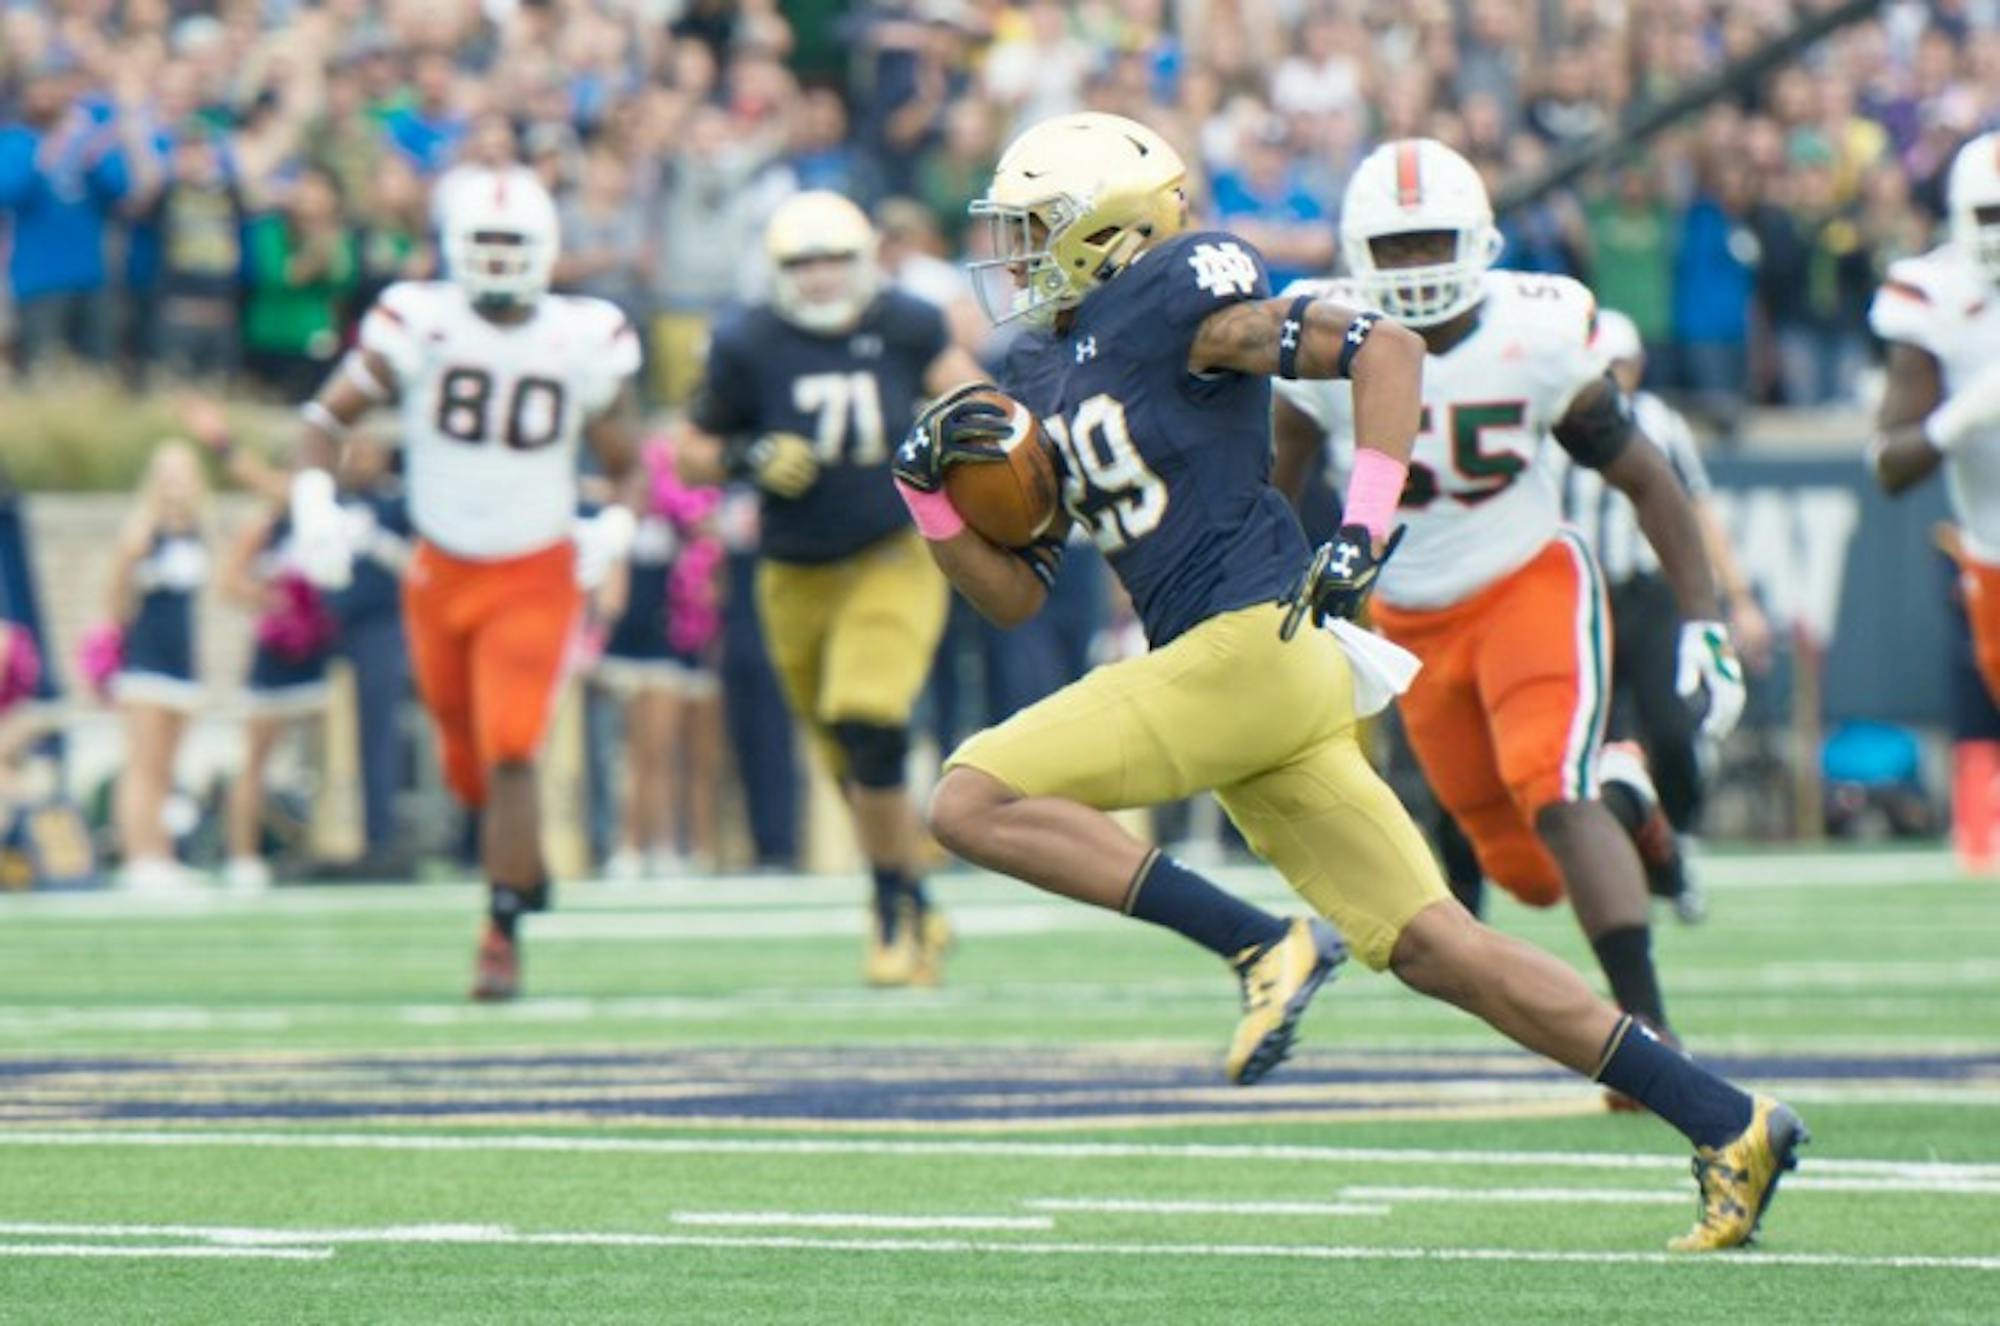 Sophomore wide receiver Kevin Stepherson cuts upfield after catching a pass during Notre Dame’s 30-27 win over Miami on Oct. 29.